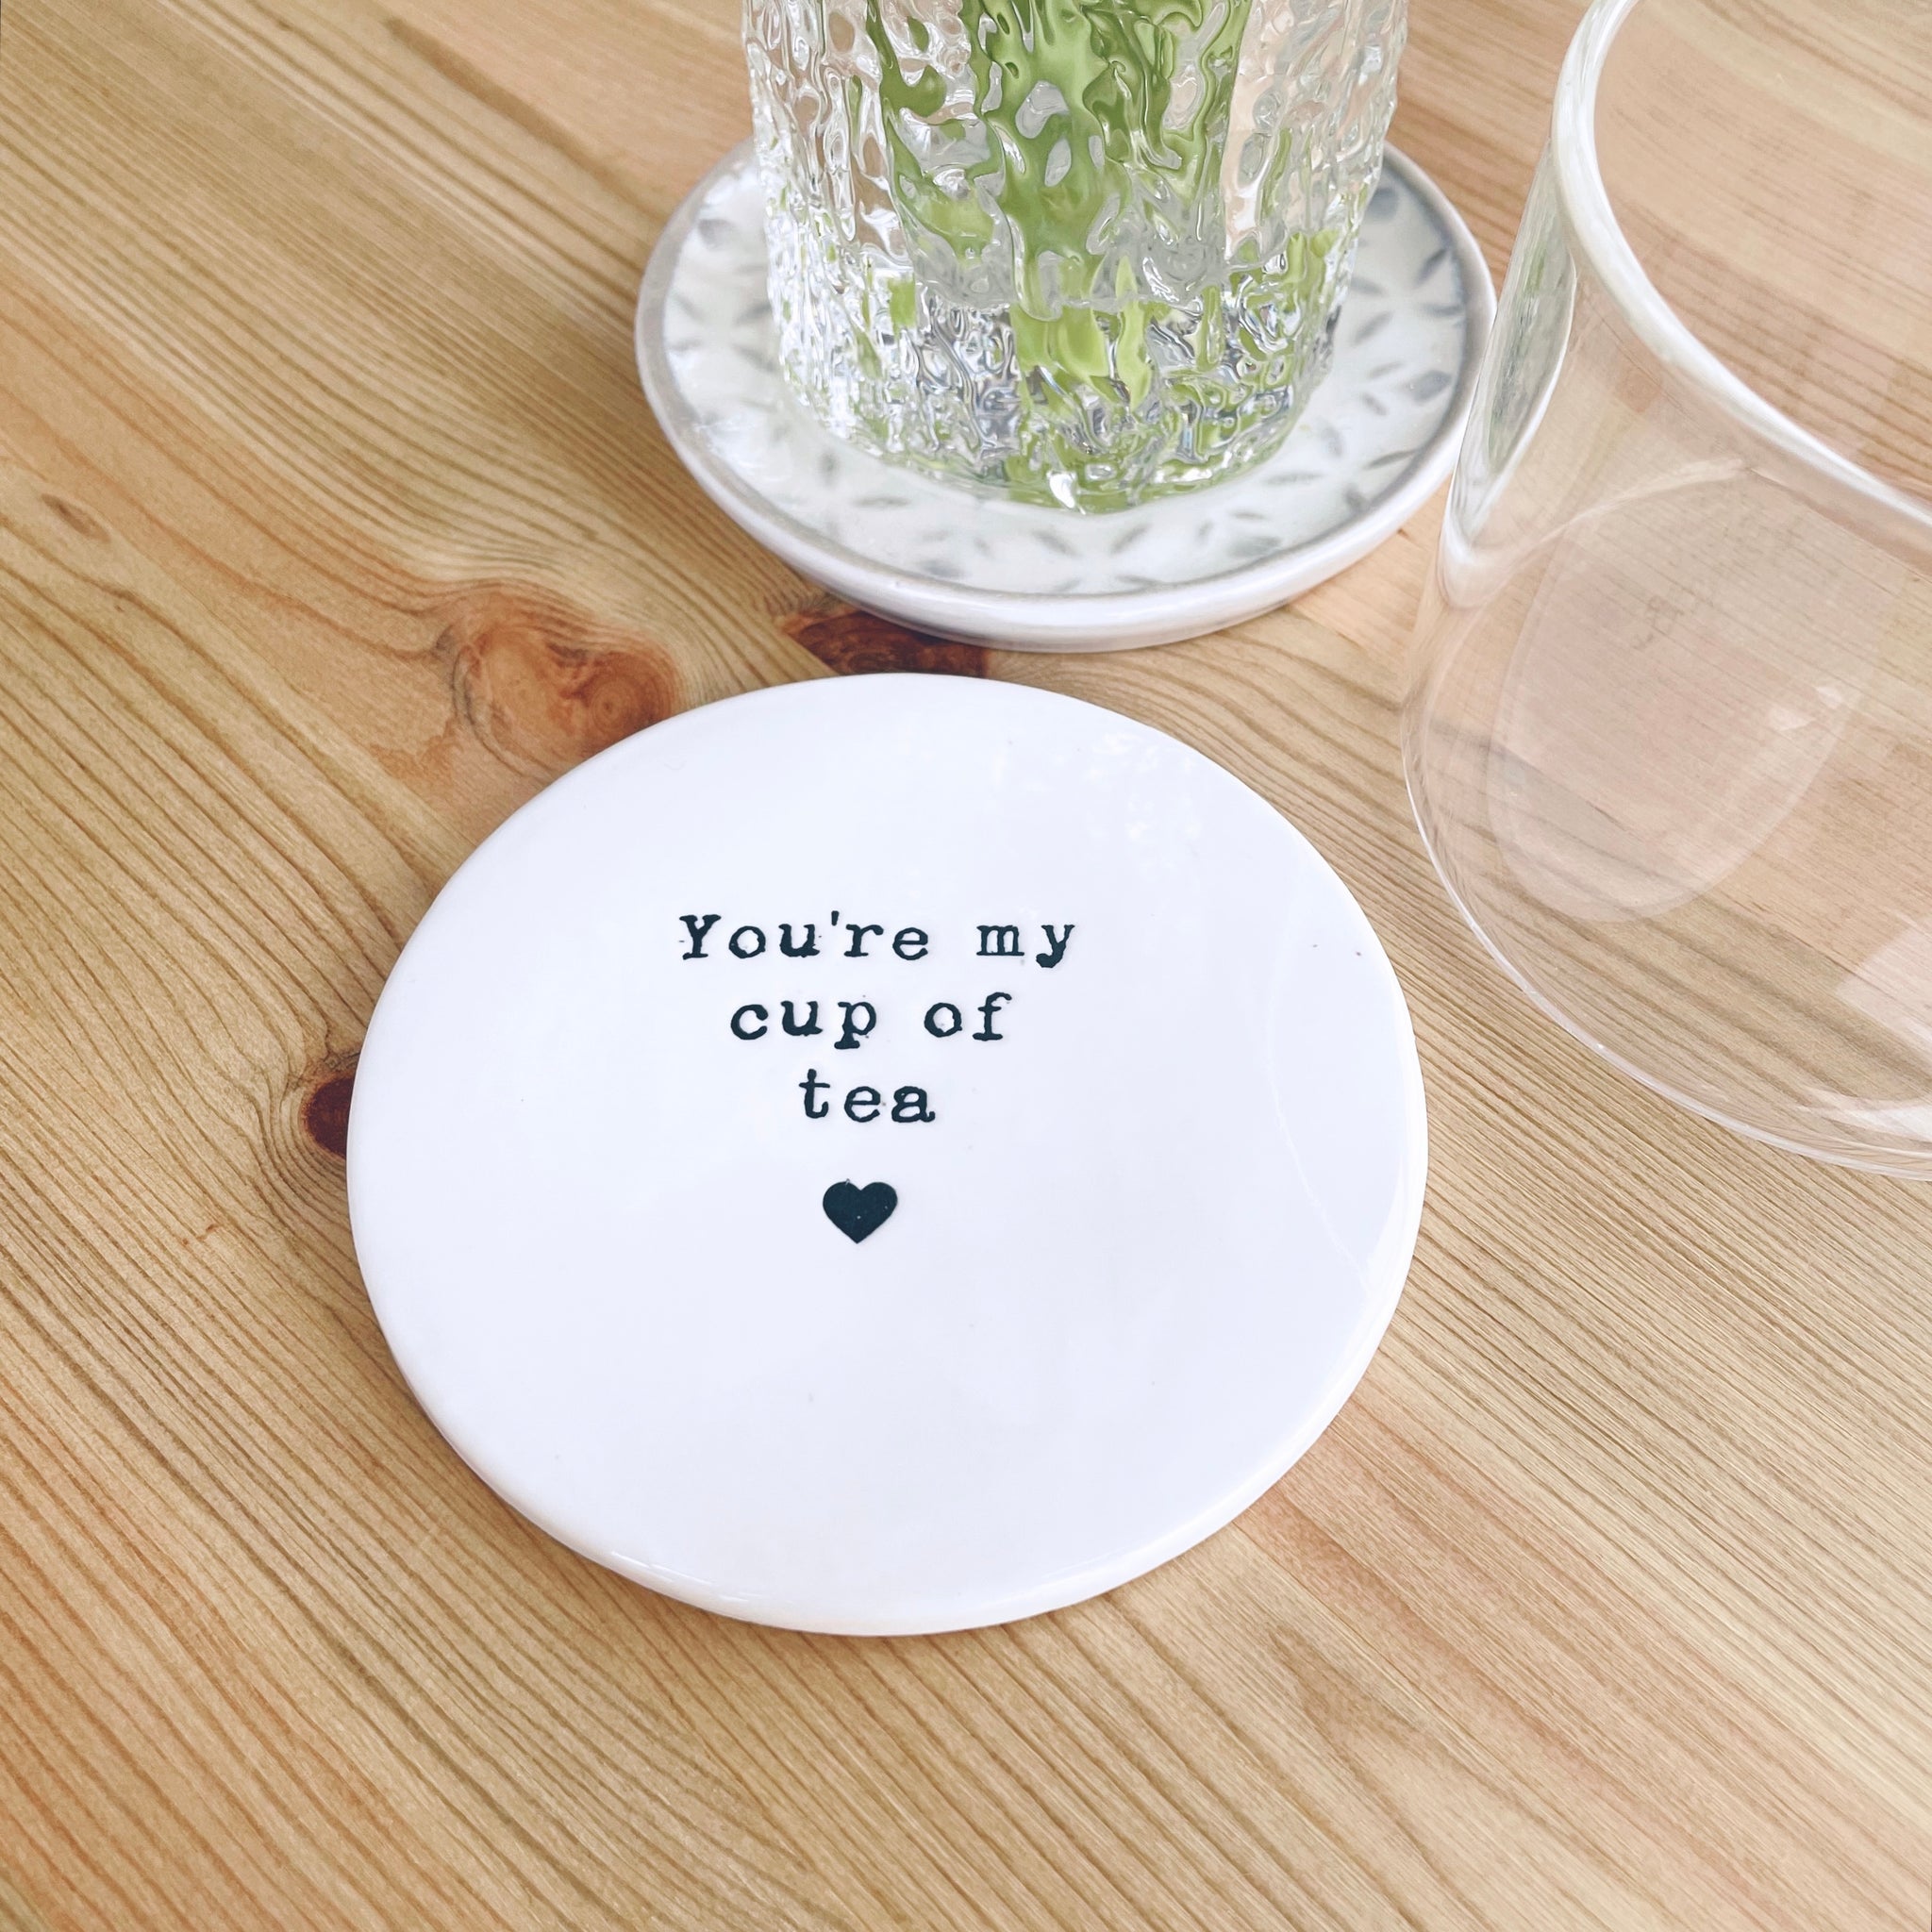 You’re my cup of tea coaster